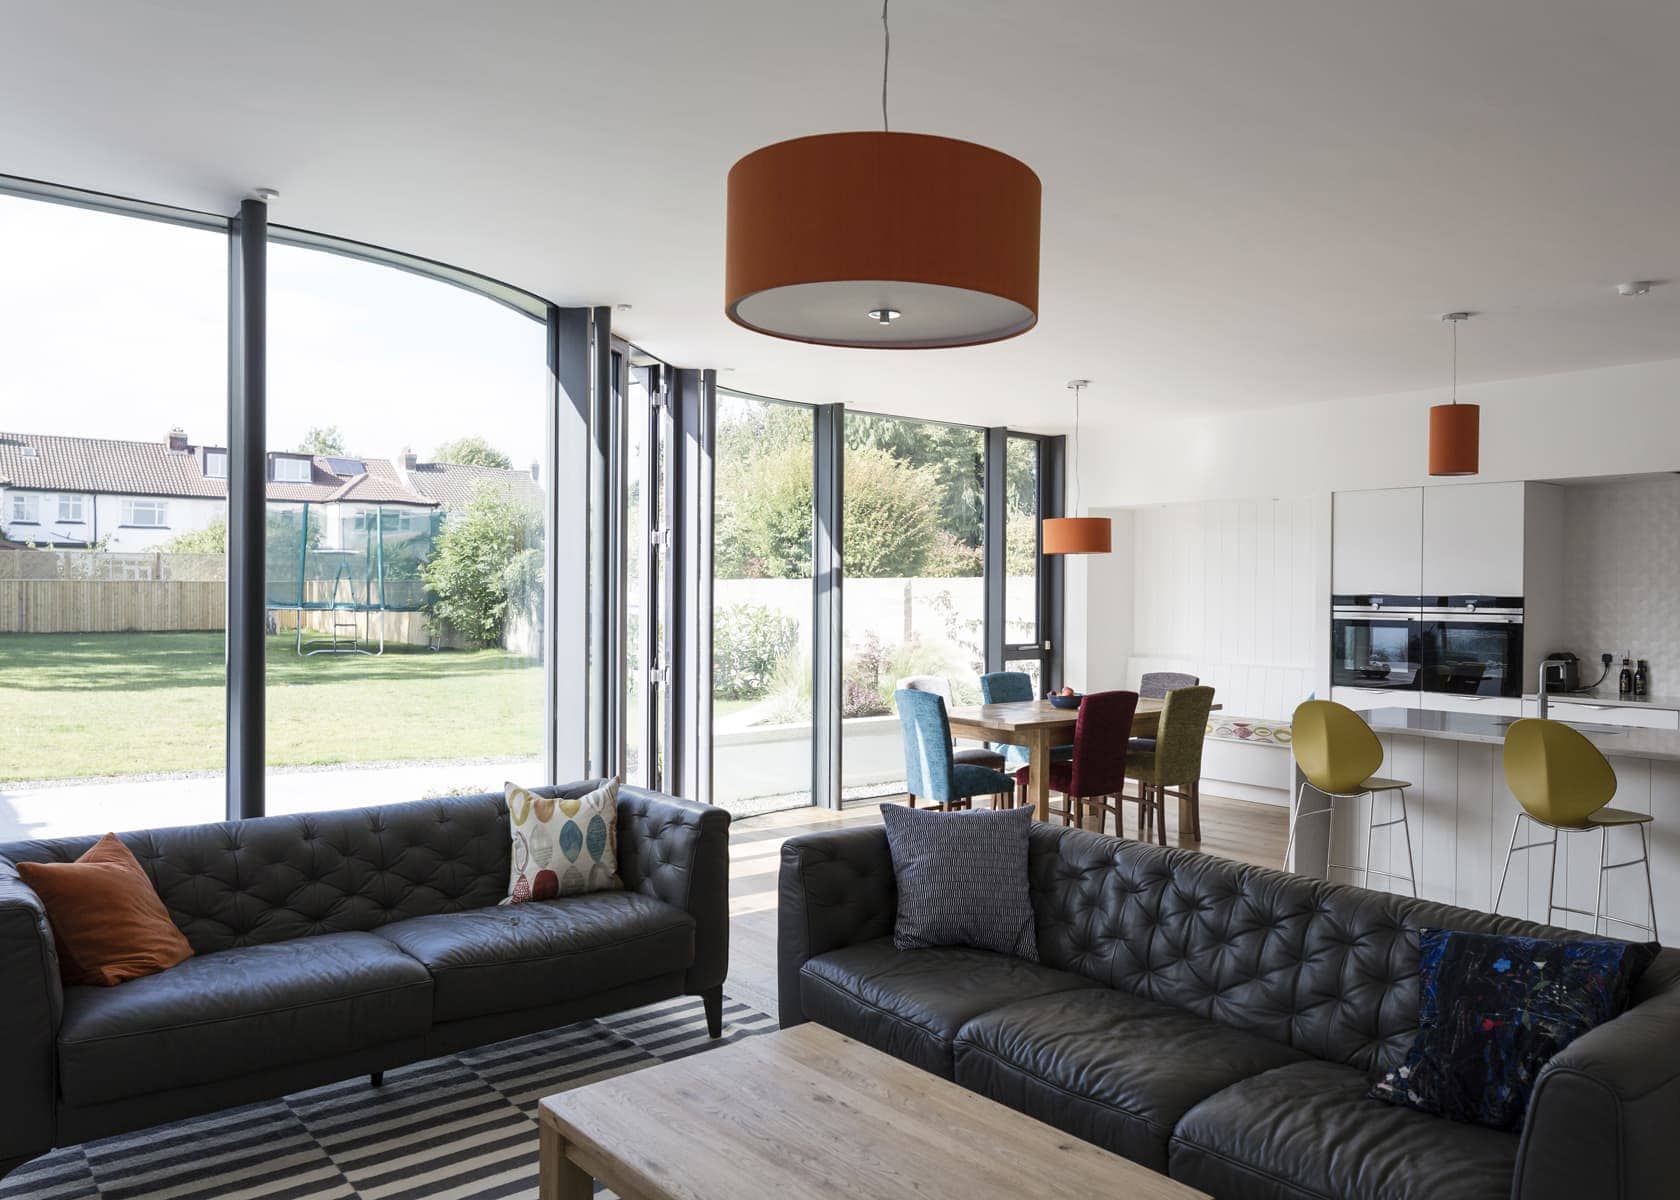 Contemporary living space in Dublin, designed by architects, with panoramic windows and a sleek kitchen